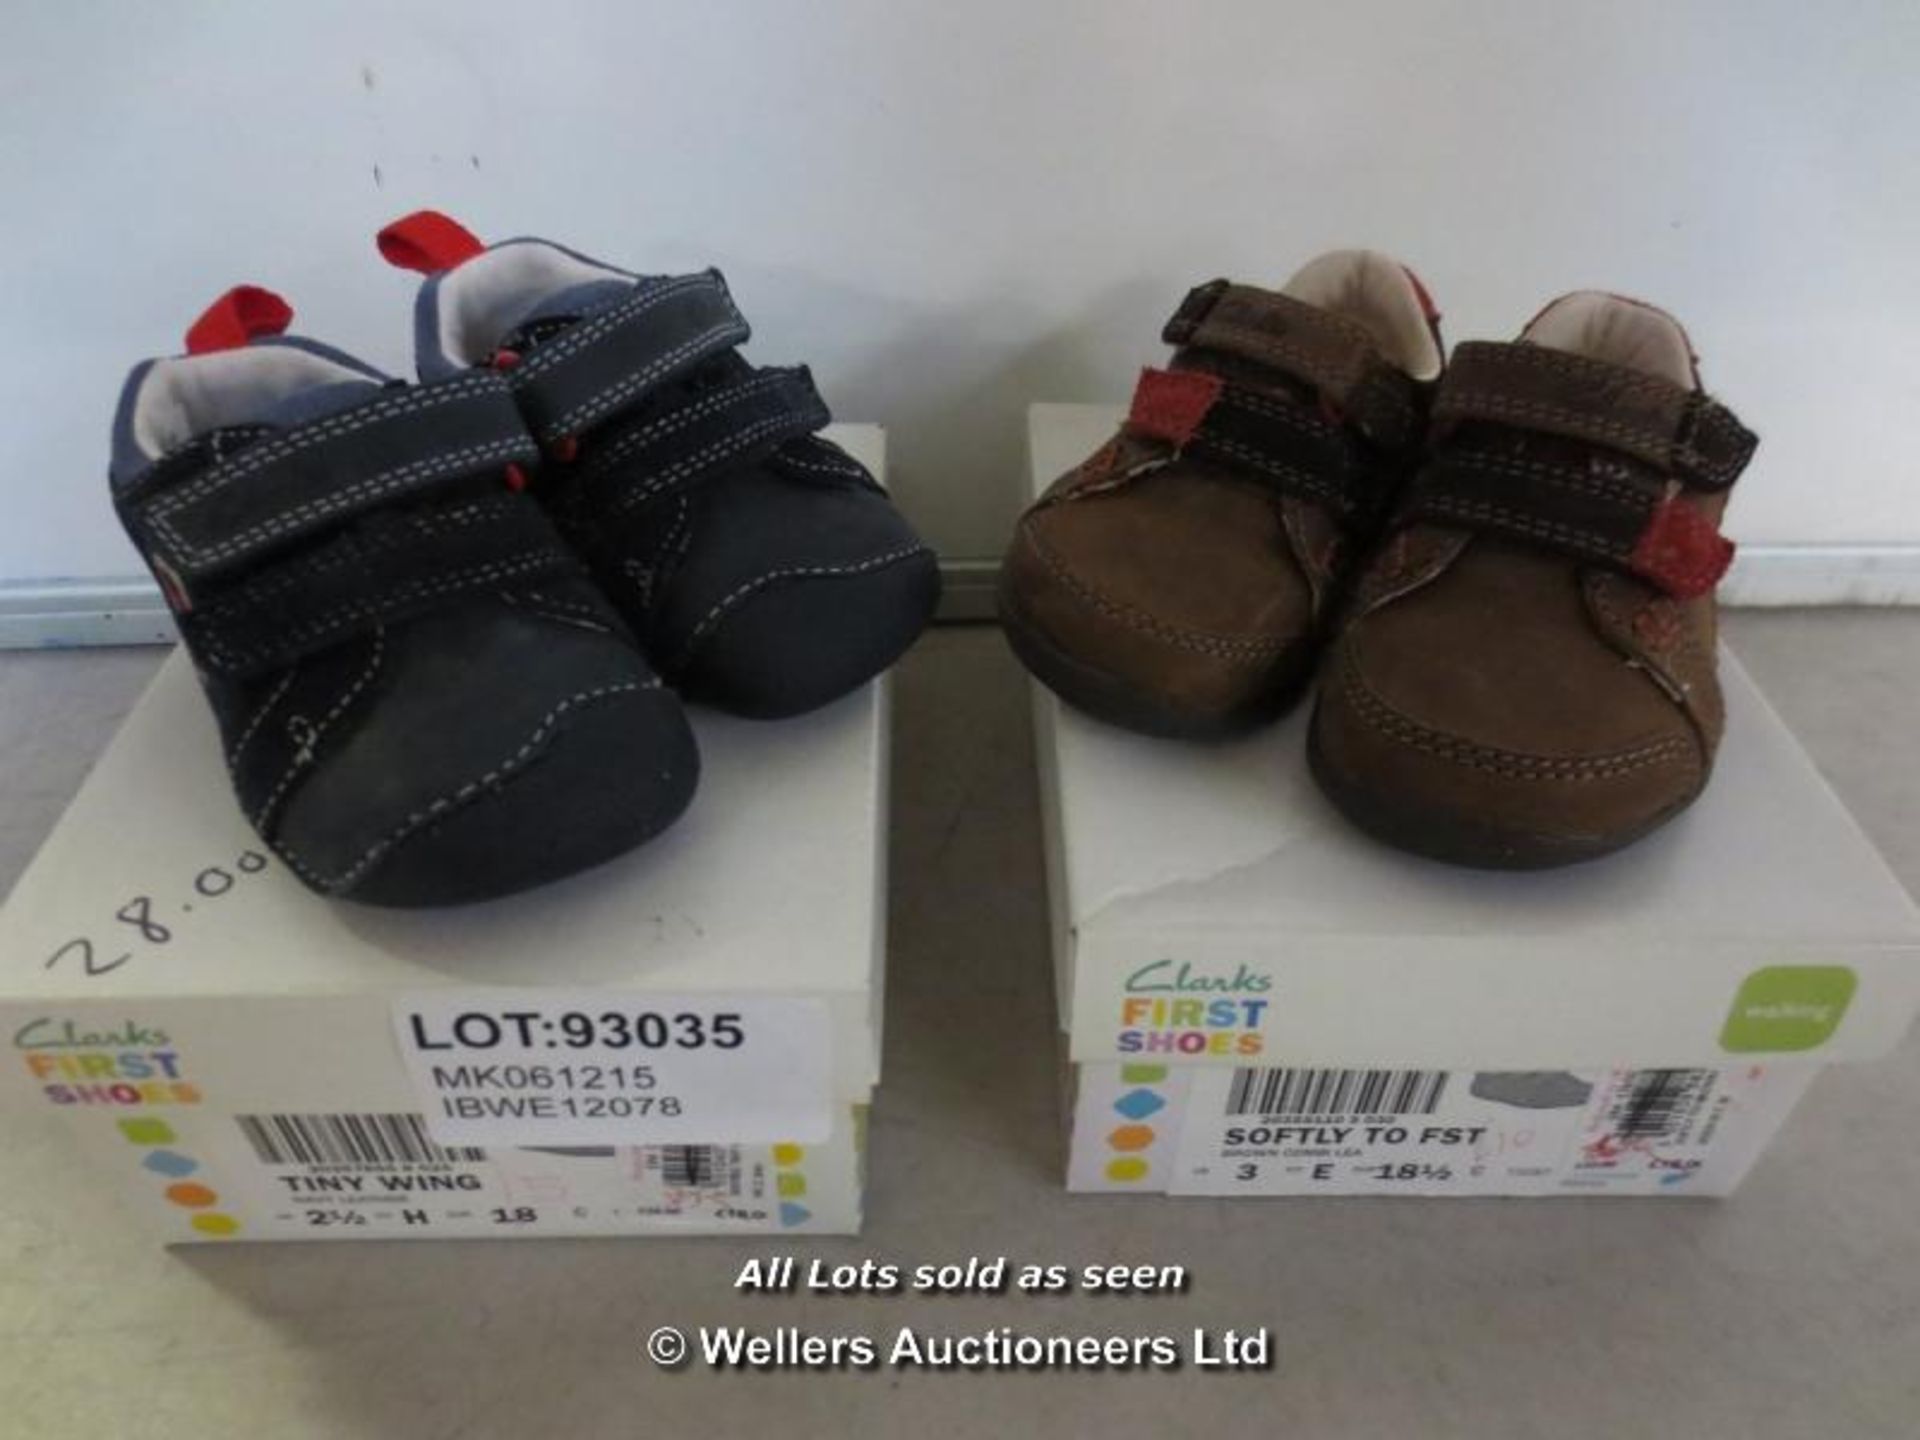 2X CLARKES FIRST SHOES INC TINY WING 2.5H & SOFTLY TO 3E / GRADE: BRAND NEW / BOXED (DC1) {AISLE '